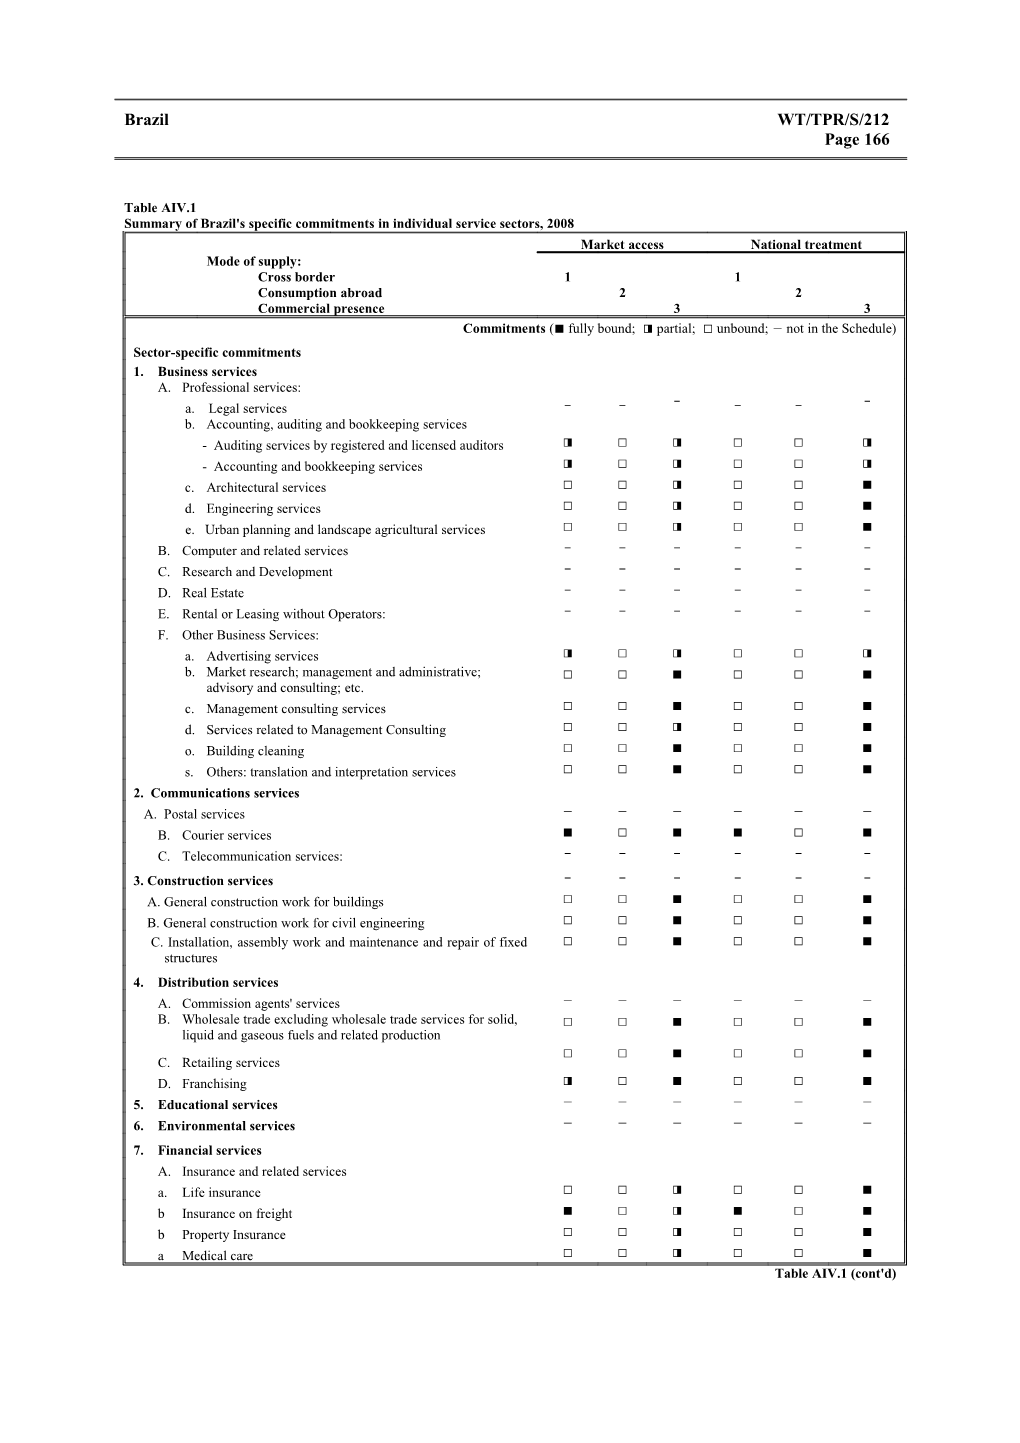 Summary of Brazil's Specific Commitments in Individual Service Sectors, 2008